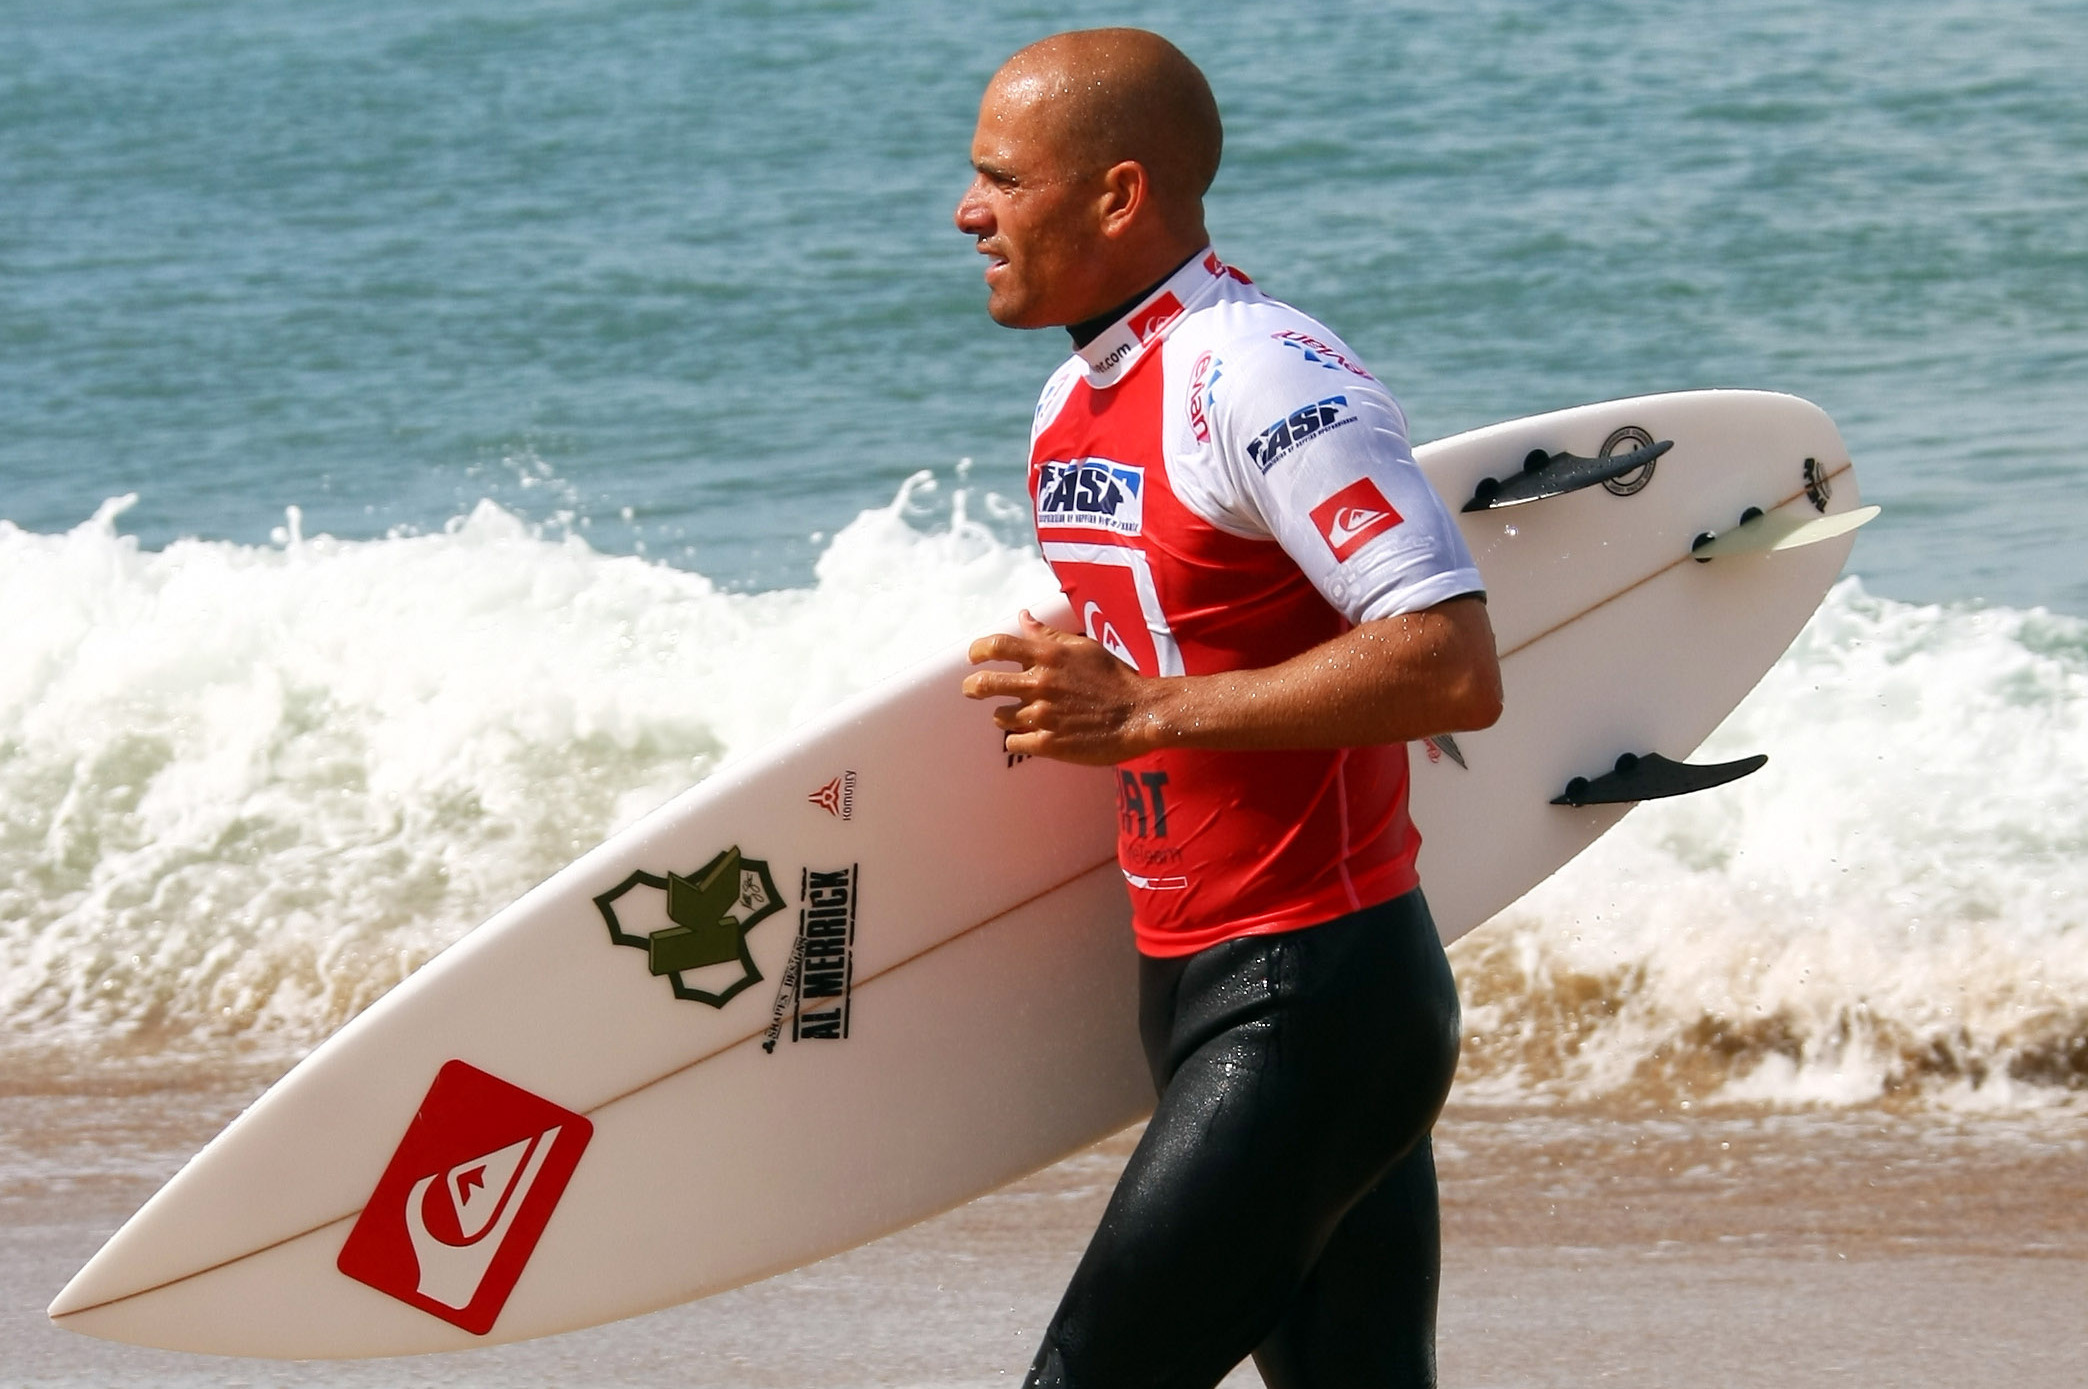 Surf Legend Kelly Slater Saves Mother and Young Son from Freak Hawaii Wave